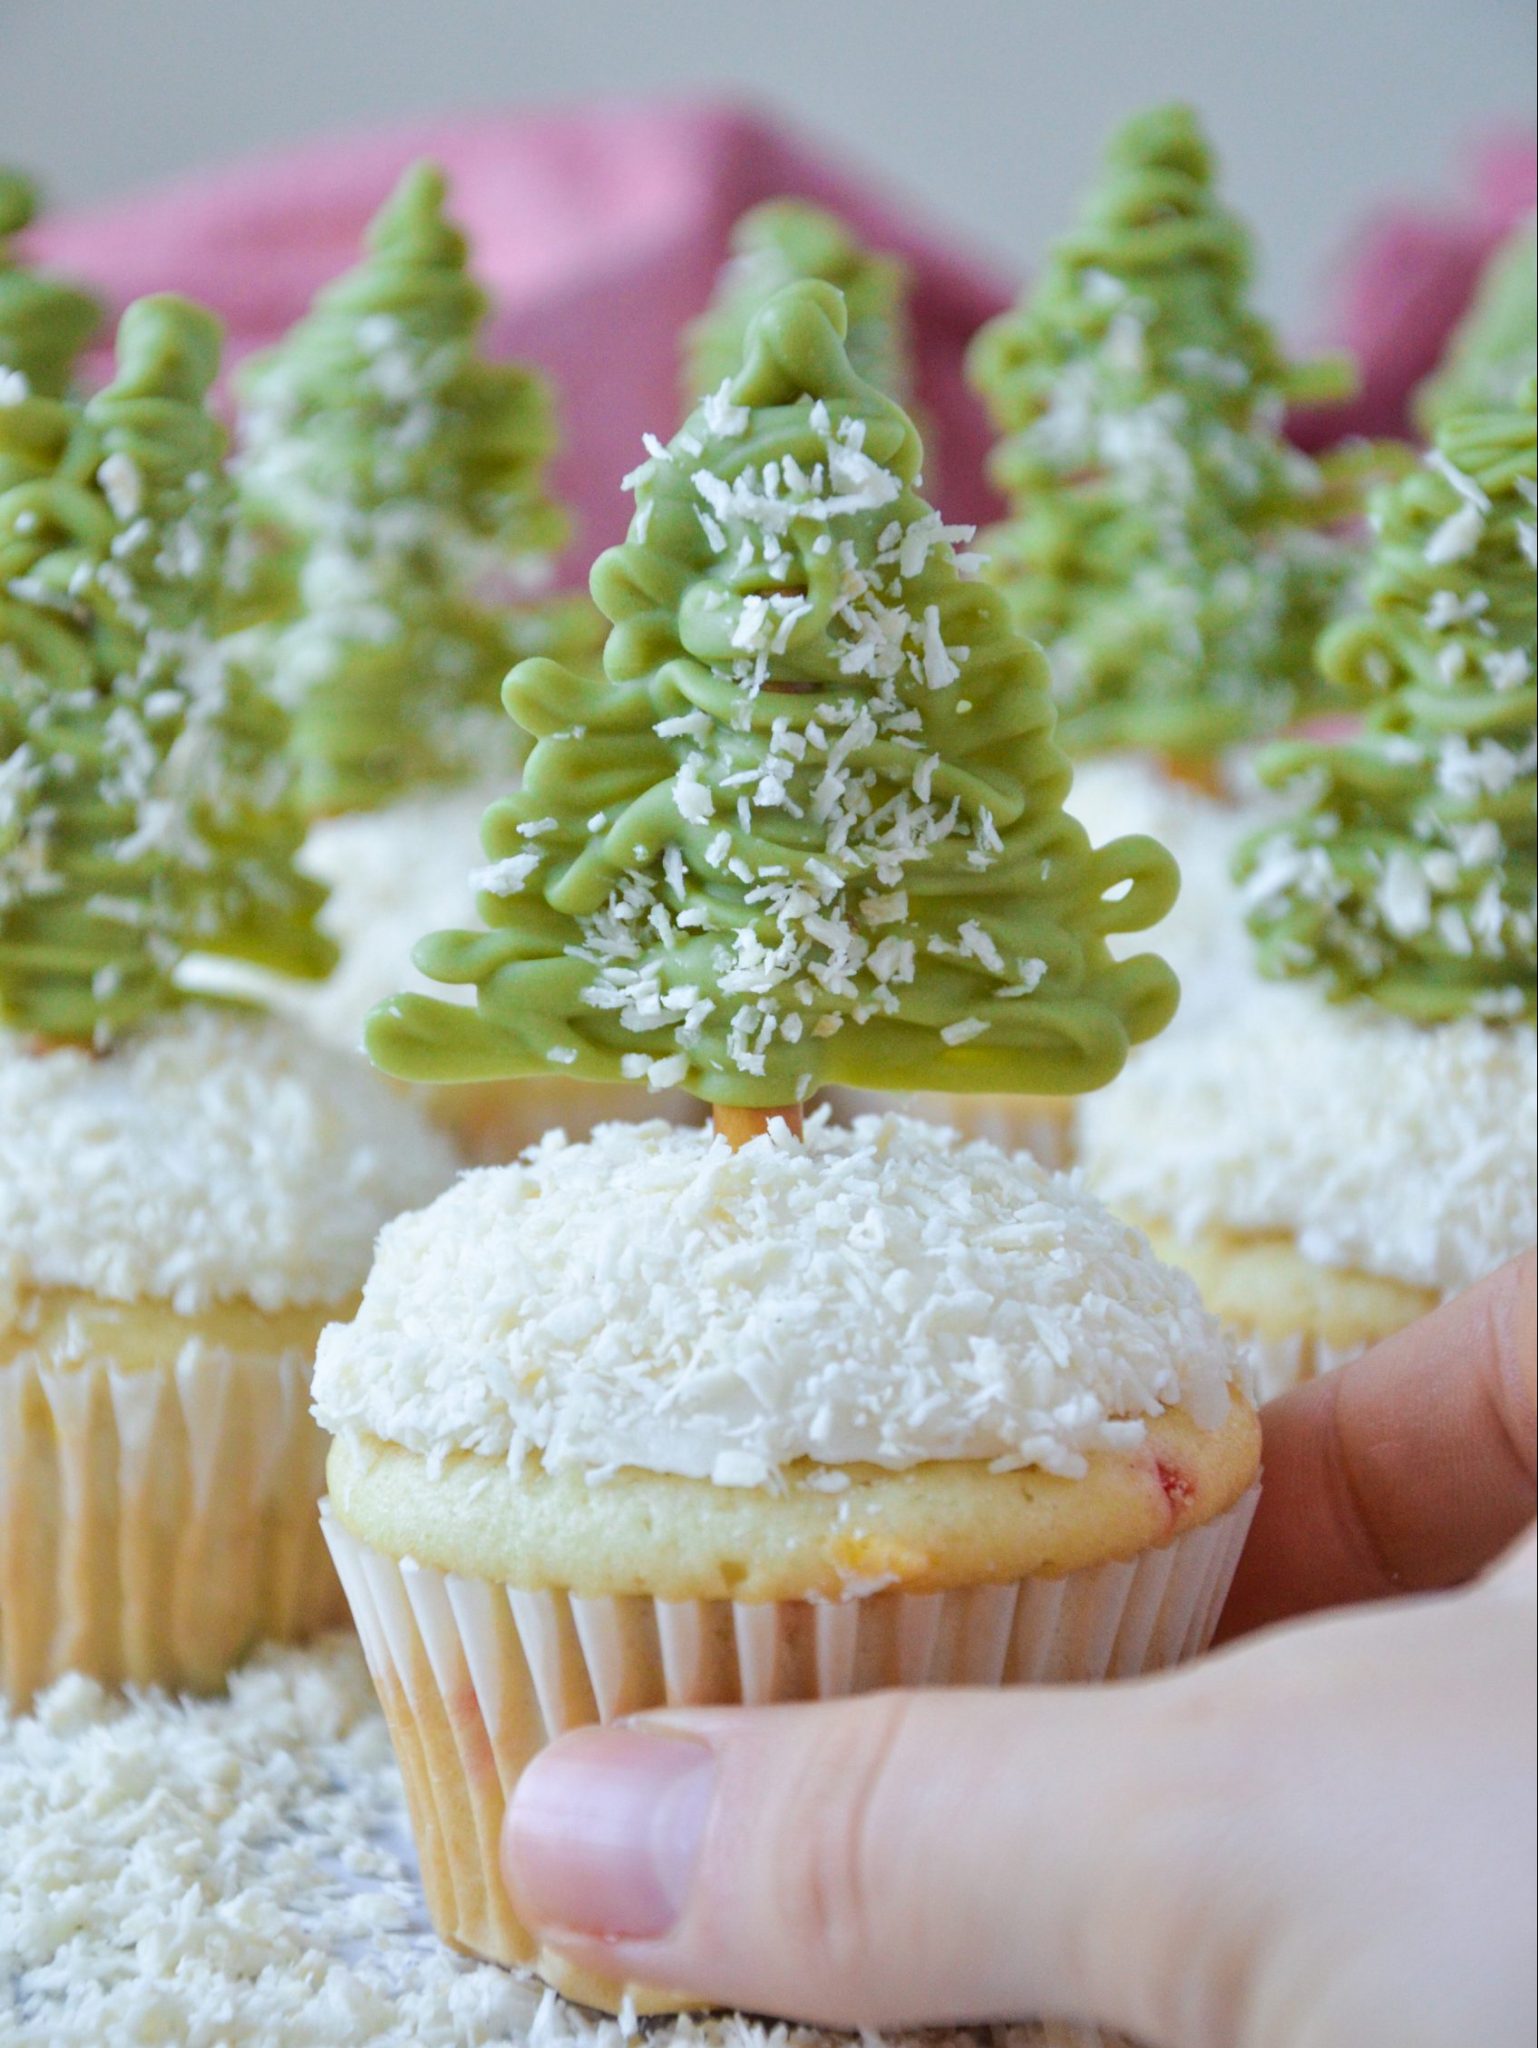 light colored vegan cupcakes with white frosting that looks like snow and dusted green christmas trees on top